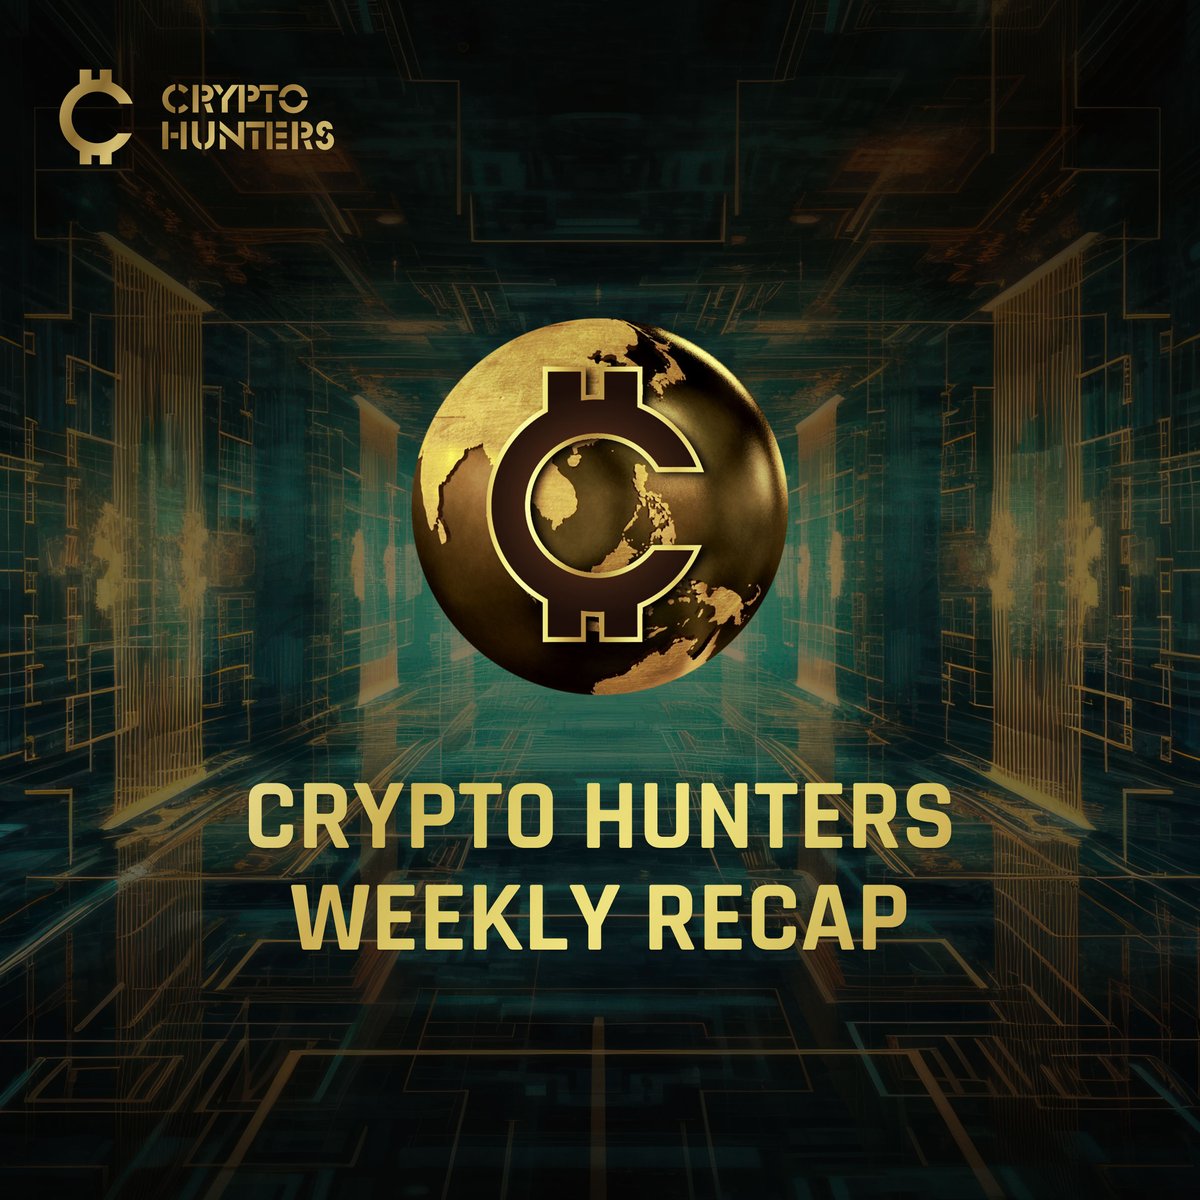 🚀 What a week for Crypto Hunters!

✅ New partnerships with @hodooi & @PlanX_DEX!
✅ Beta testing invites are rolling out!
✅ Relive Crypto Hunters Hour with the team: youtube.com/watch?v=0UQlAU…

More to come this week 📲 Follow us!

#CryptoHunters #JoinTheHunt